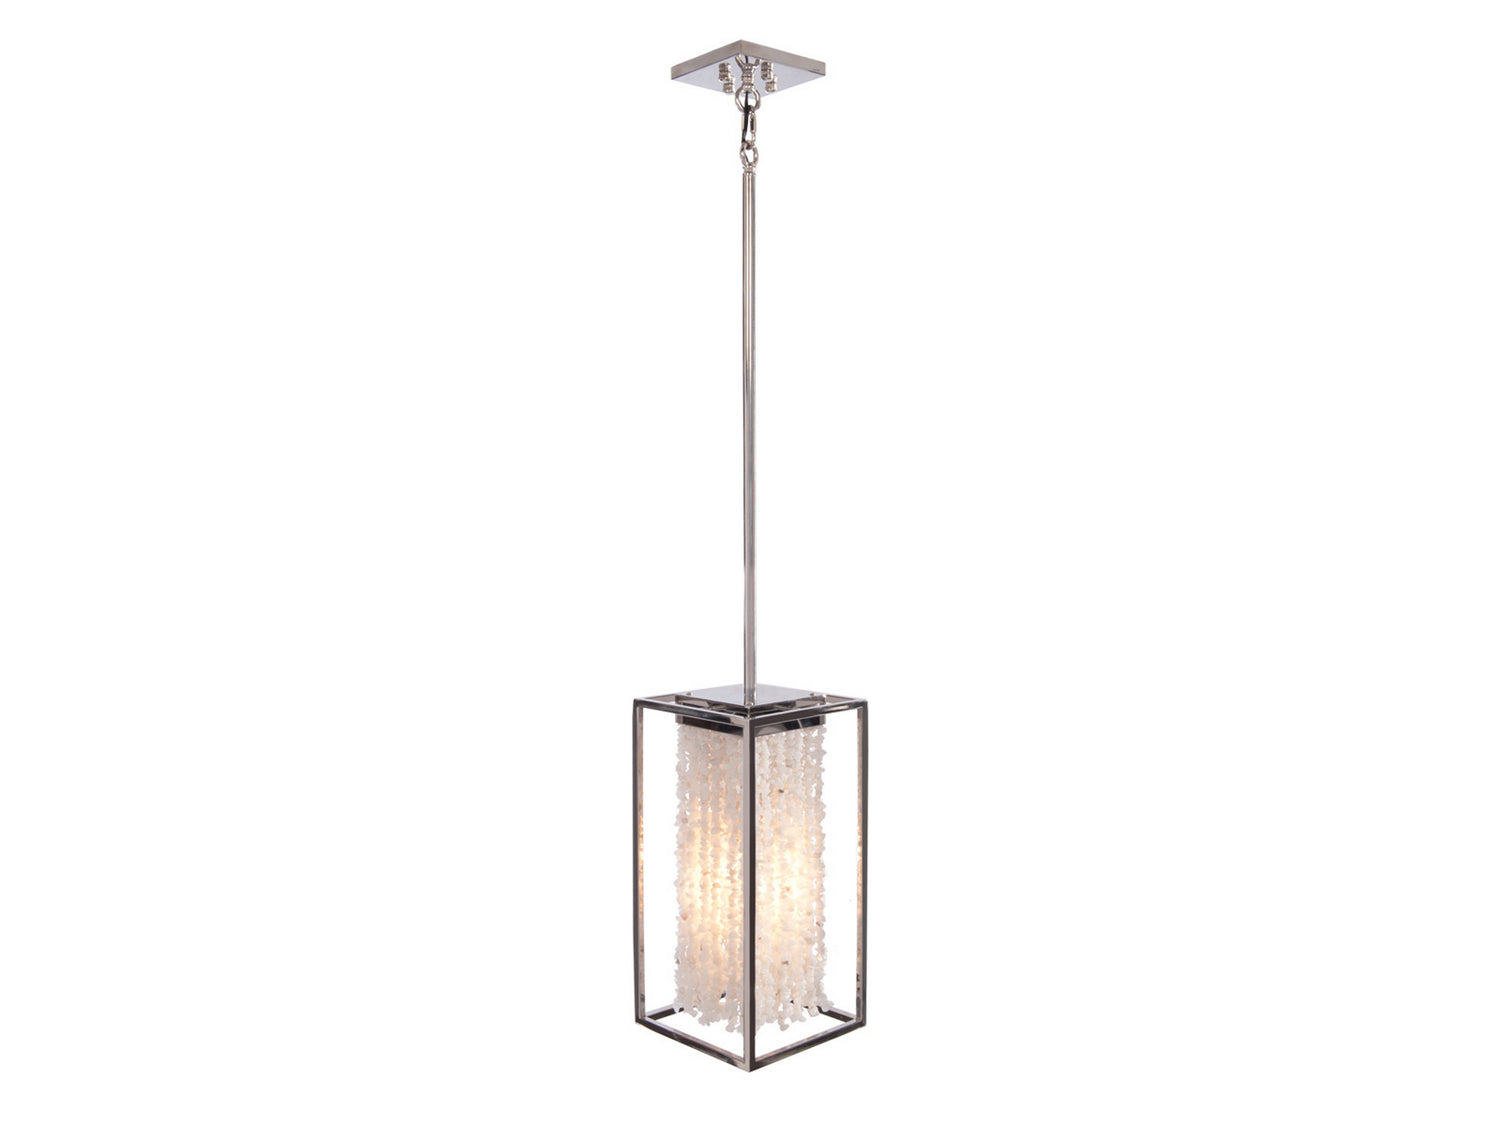 Avenue Lighting - HF9001-SLV - One Light Wall Sconce - Soho - Polished Nickel Silver Finish With Moon Rock Gem Nuggets